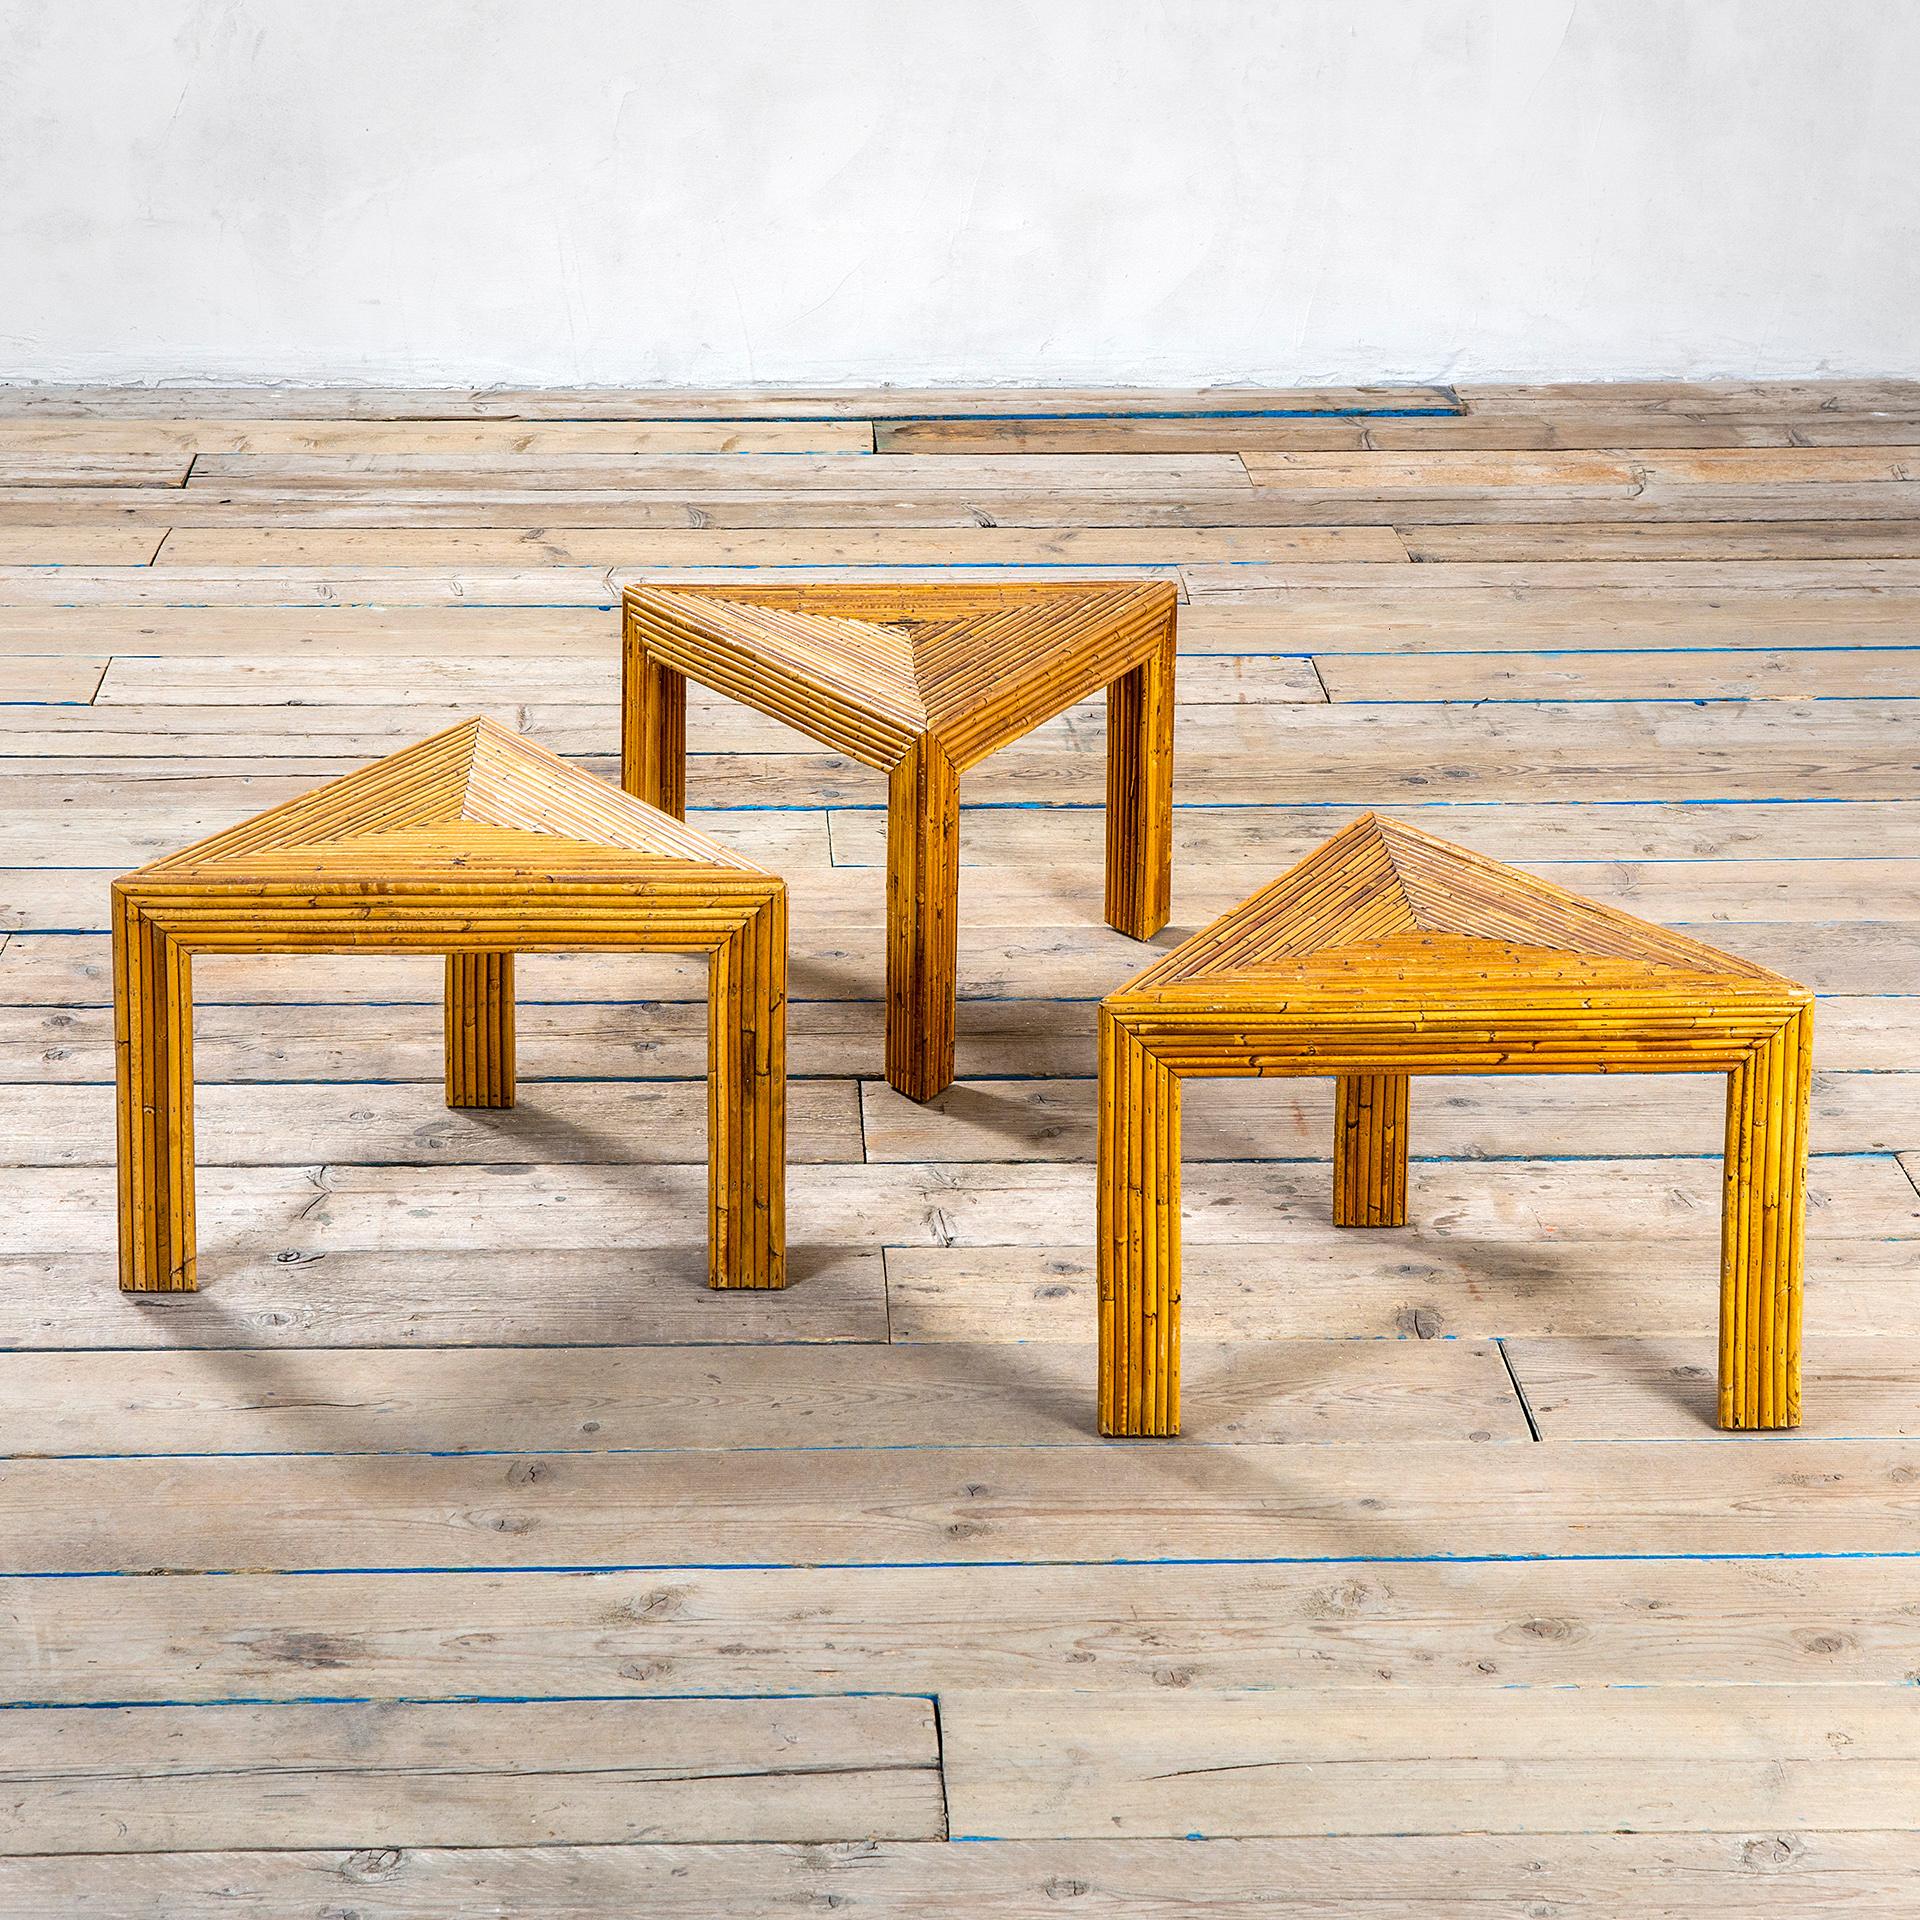 Set of three low table in triangular shap in wicker and bamboo by Vivai del Sud and designed in '60s. 
The tables can be set as a unique table (in different shapes, some suggestions in our photos) or they can be set separated in the room. These are